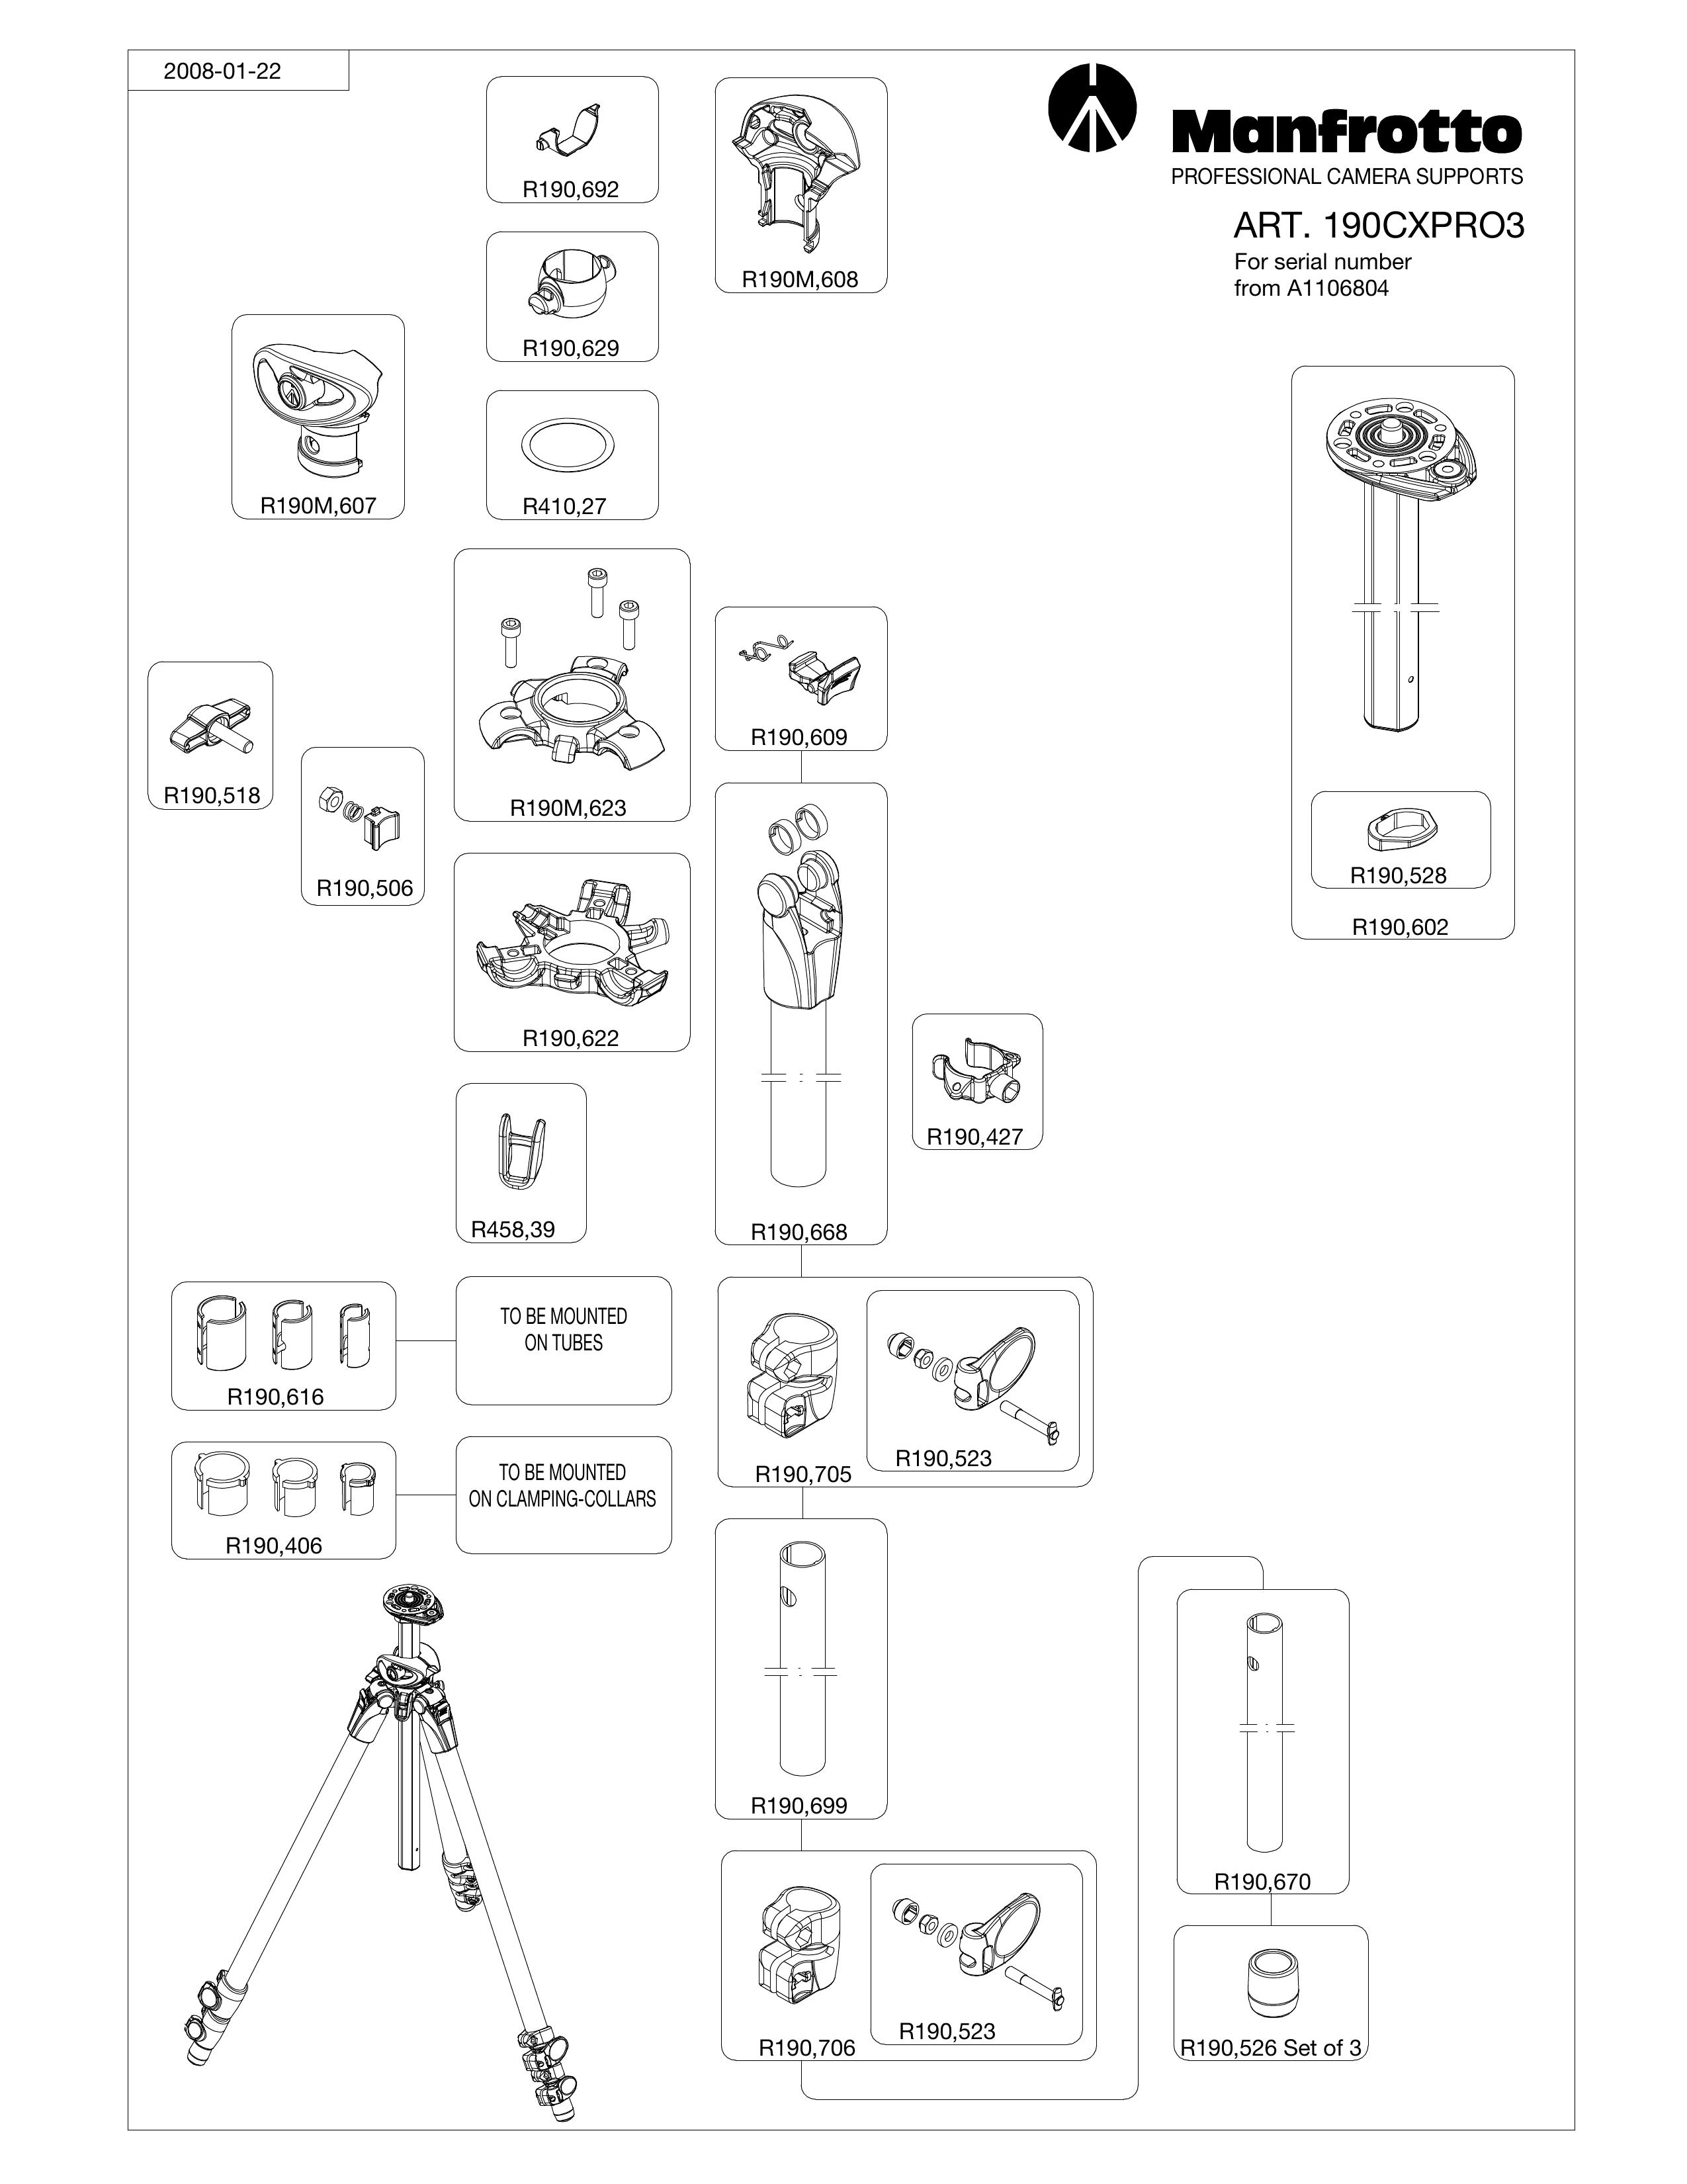 Manfrotto ART. 190CXPRO3 Camcorder Accessories User Manual